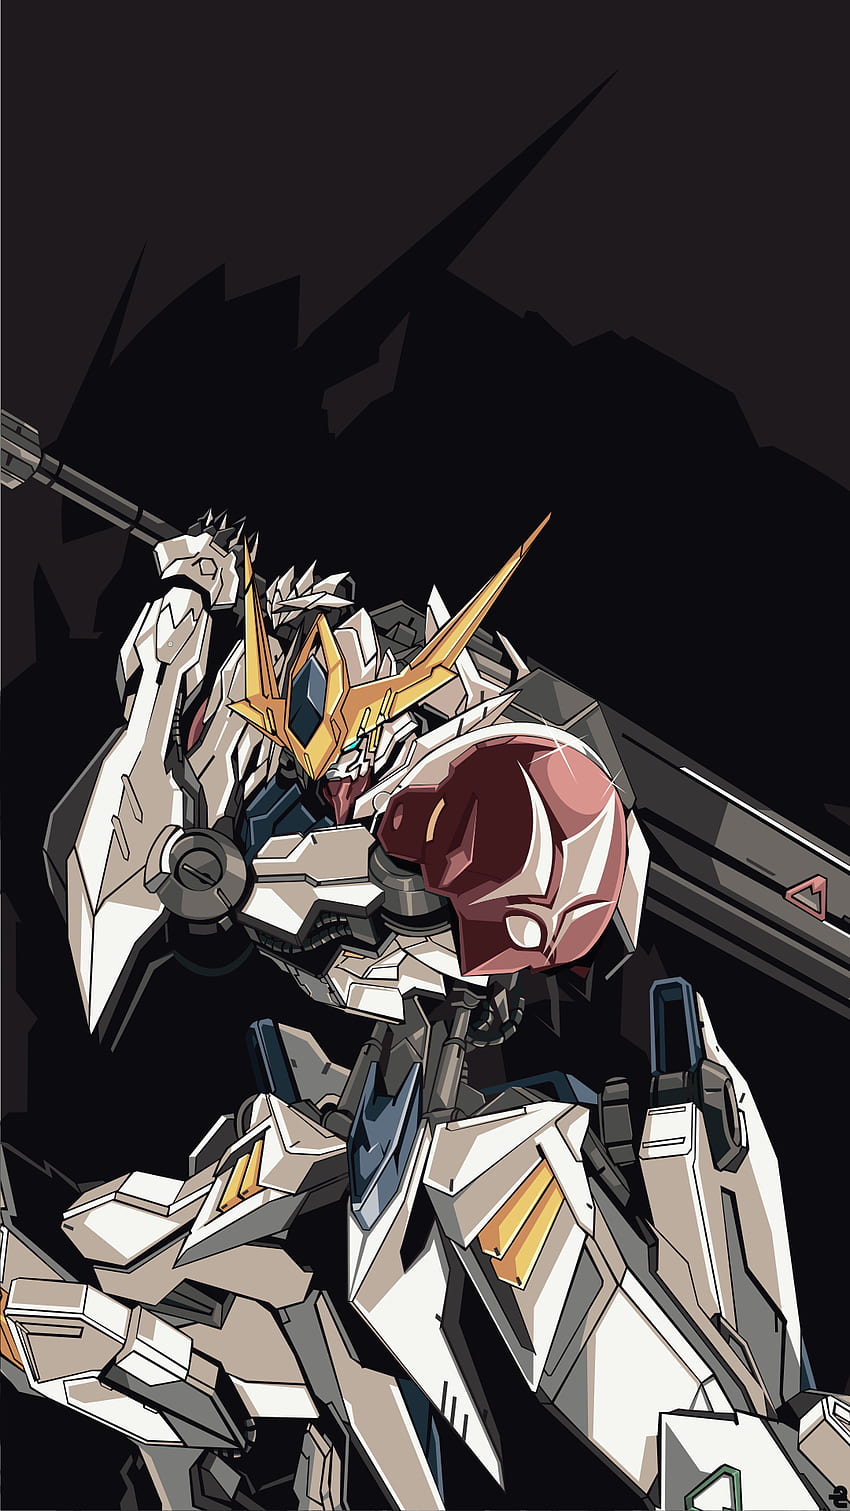 What Do You Think Is the Core Appeal of Gundam and How Has It Amassed Such  a Loyal Fanbase? : r/Gundam